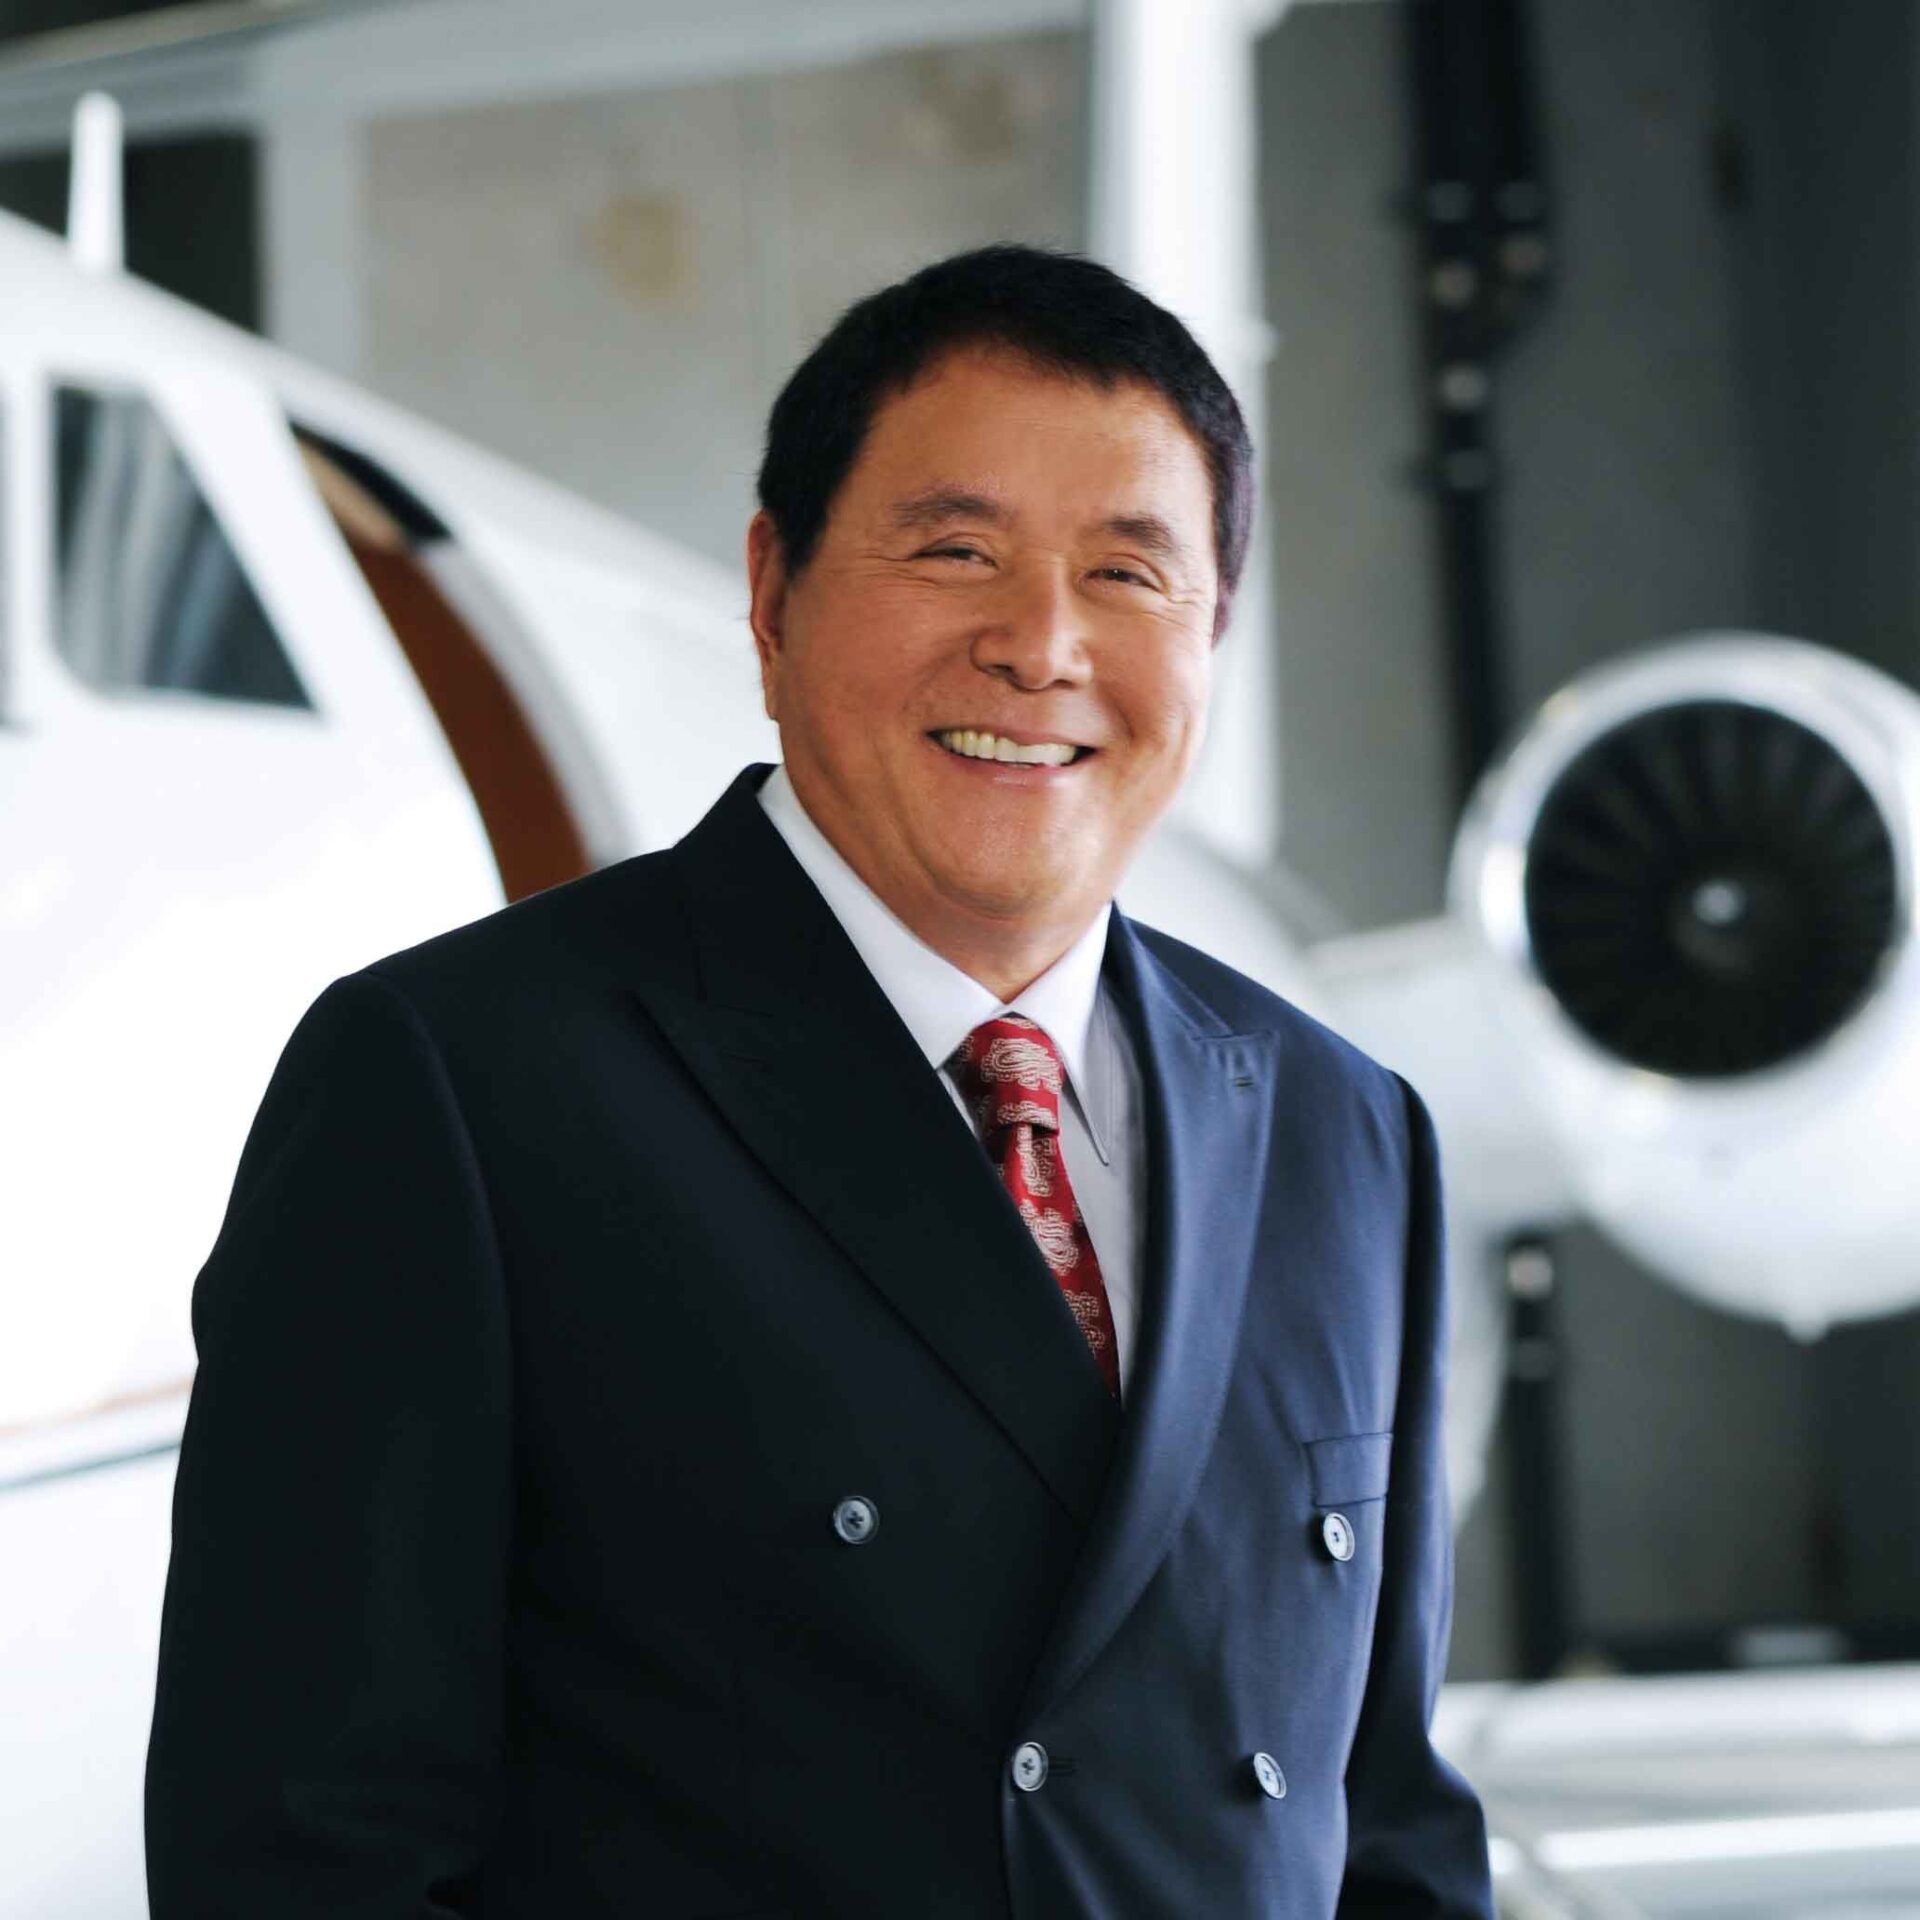 Kiyosaki tells us about his perspective on money and teaches us the basics of entrepreneurship, as well as the real-estate business overall, and how to achieve true financial independence.